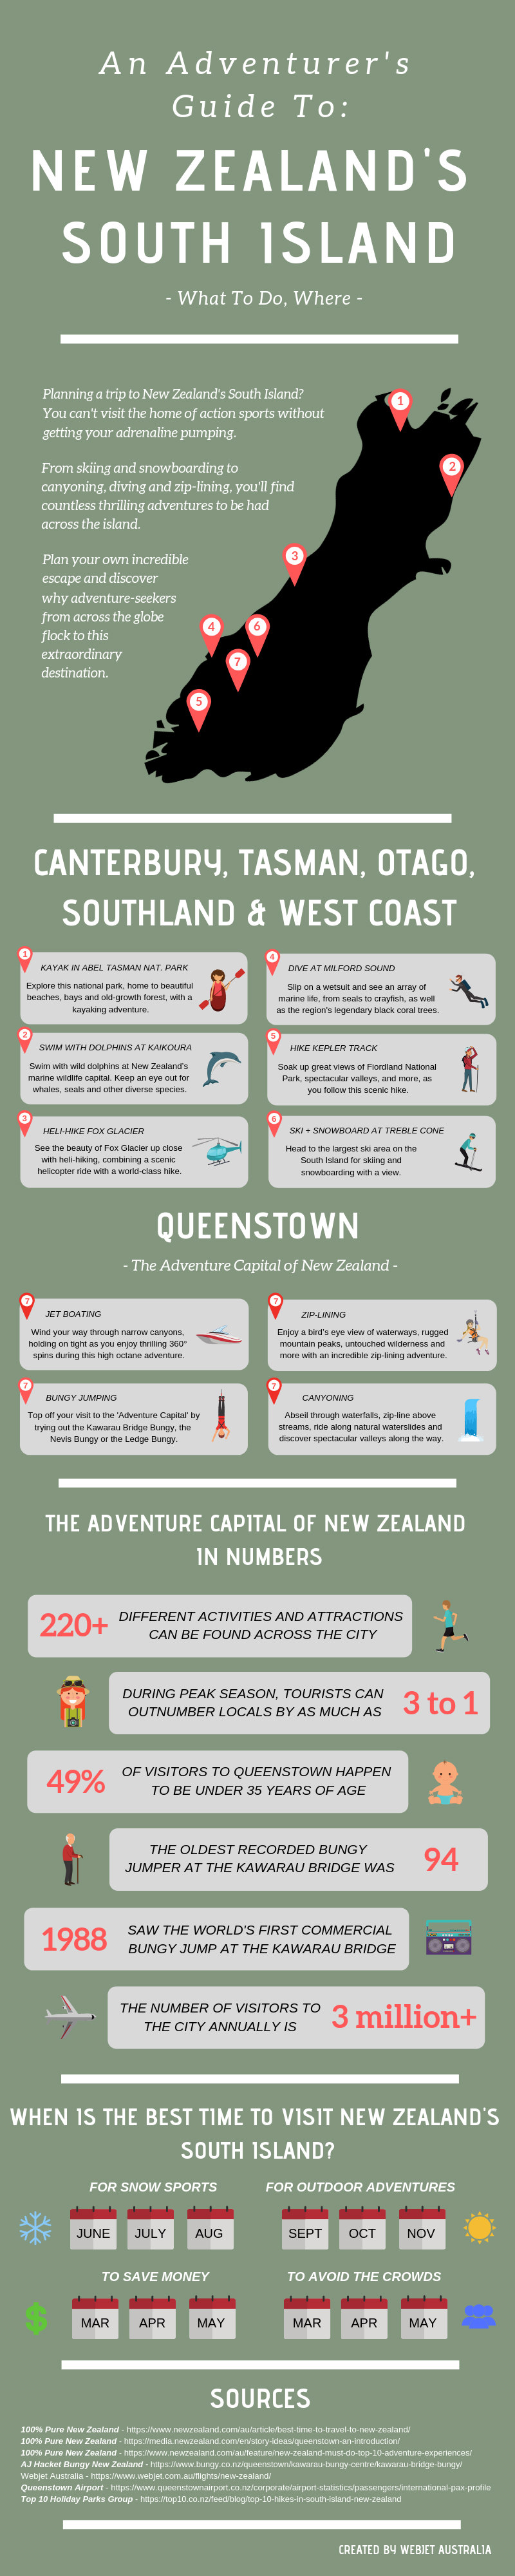 An Adventurer's Guide To: New Zealand's South Island